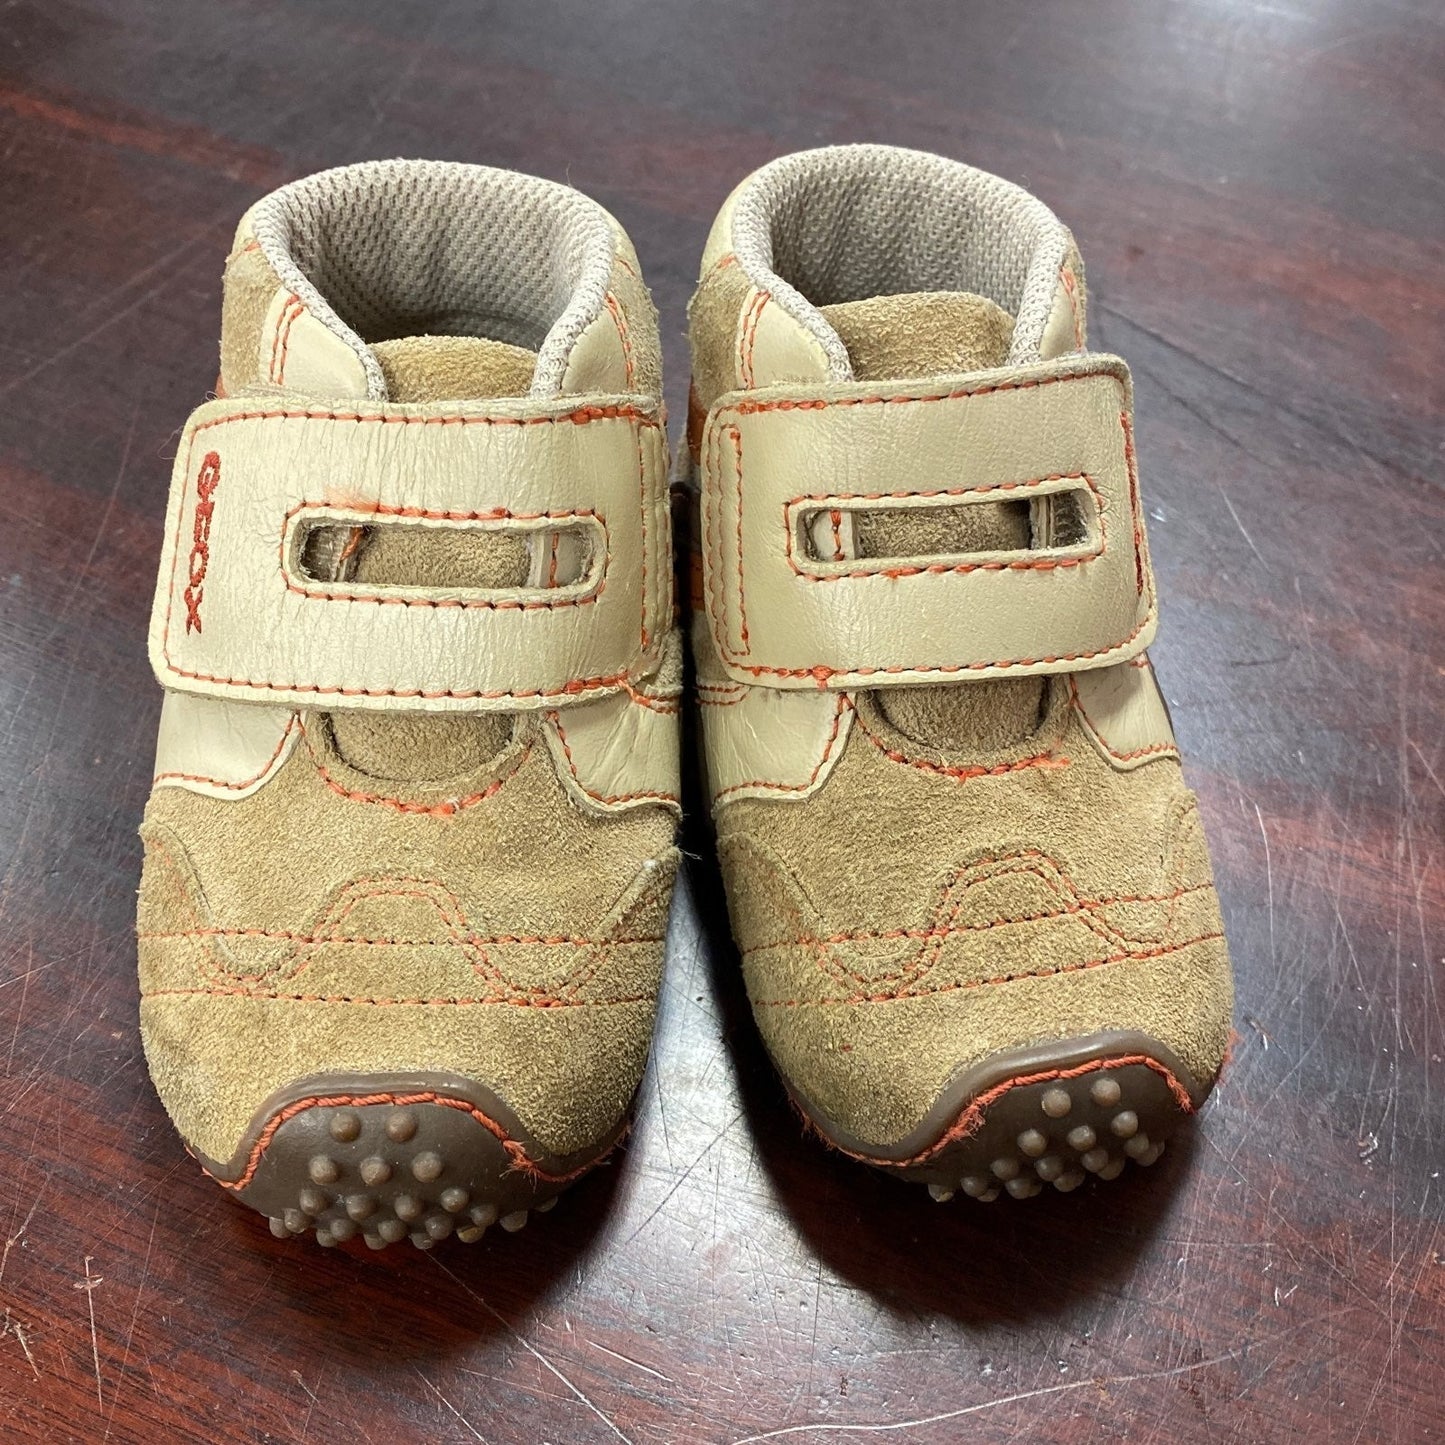 Toddler geox respira shoes size 4.5